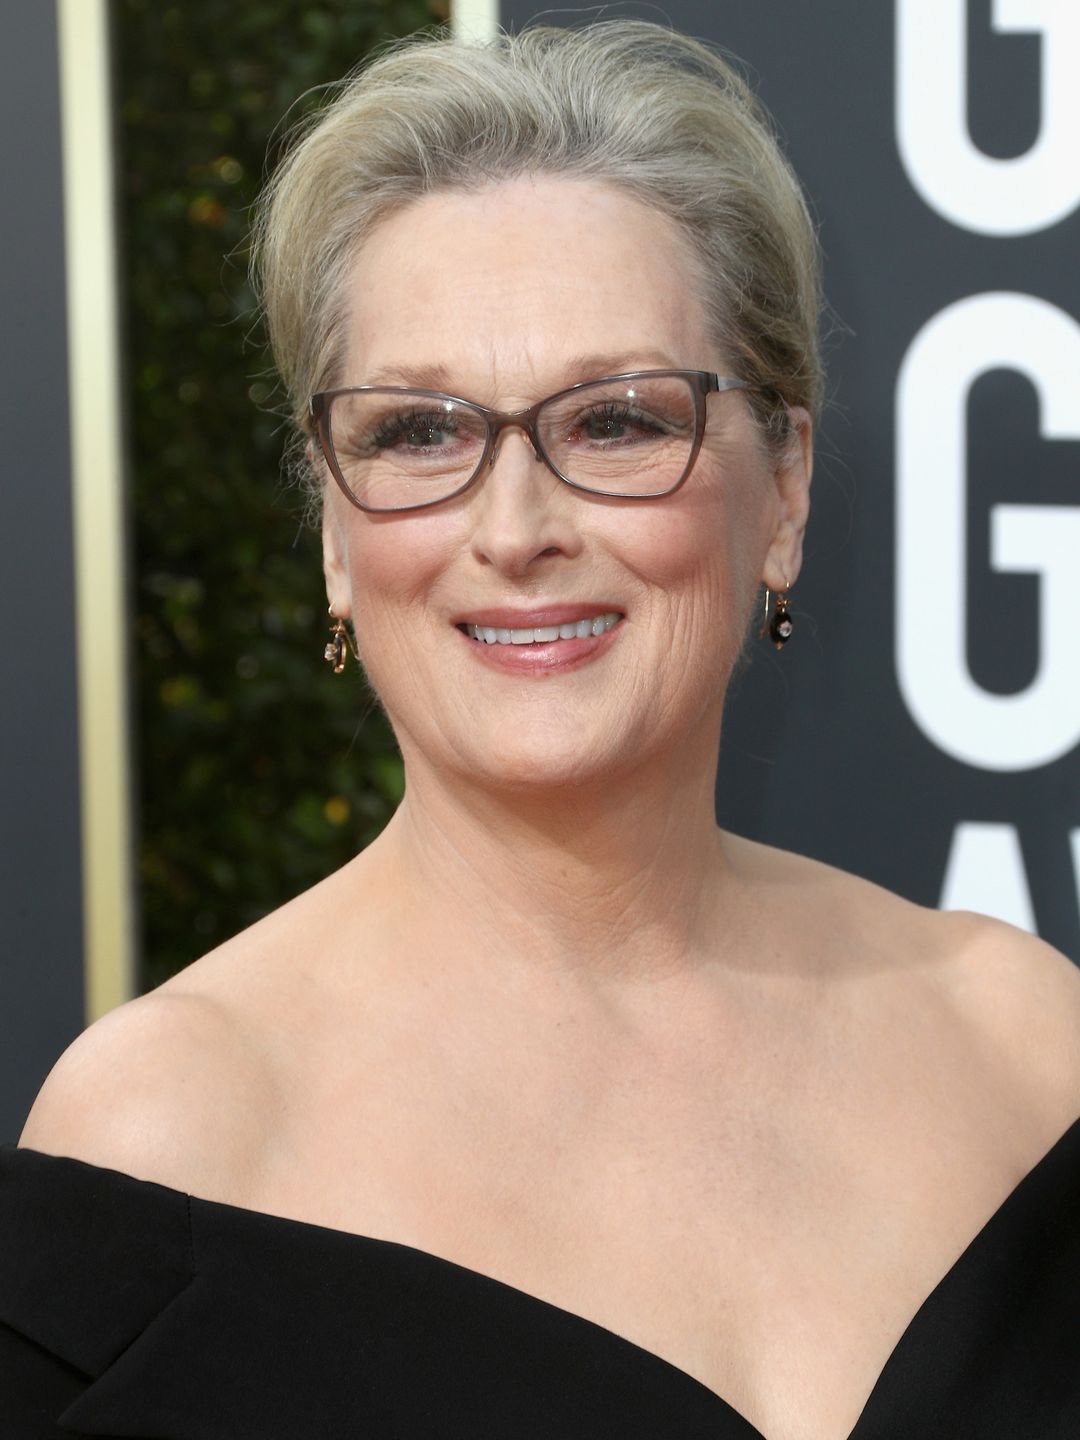 Meryl Streep who are her parents